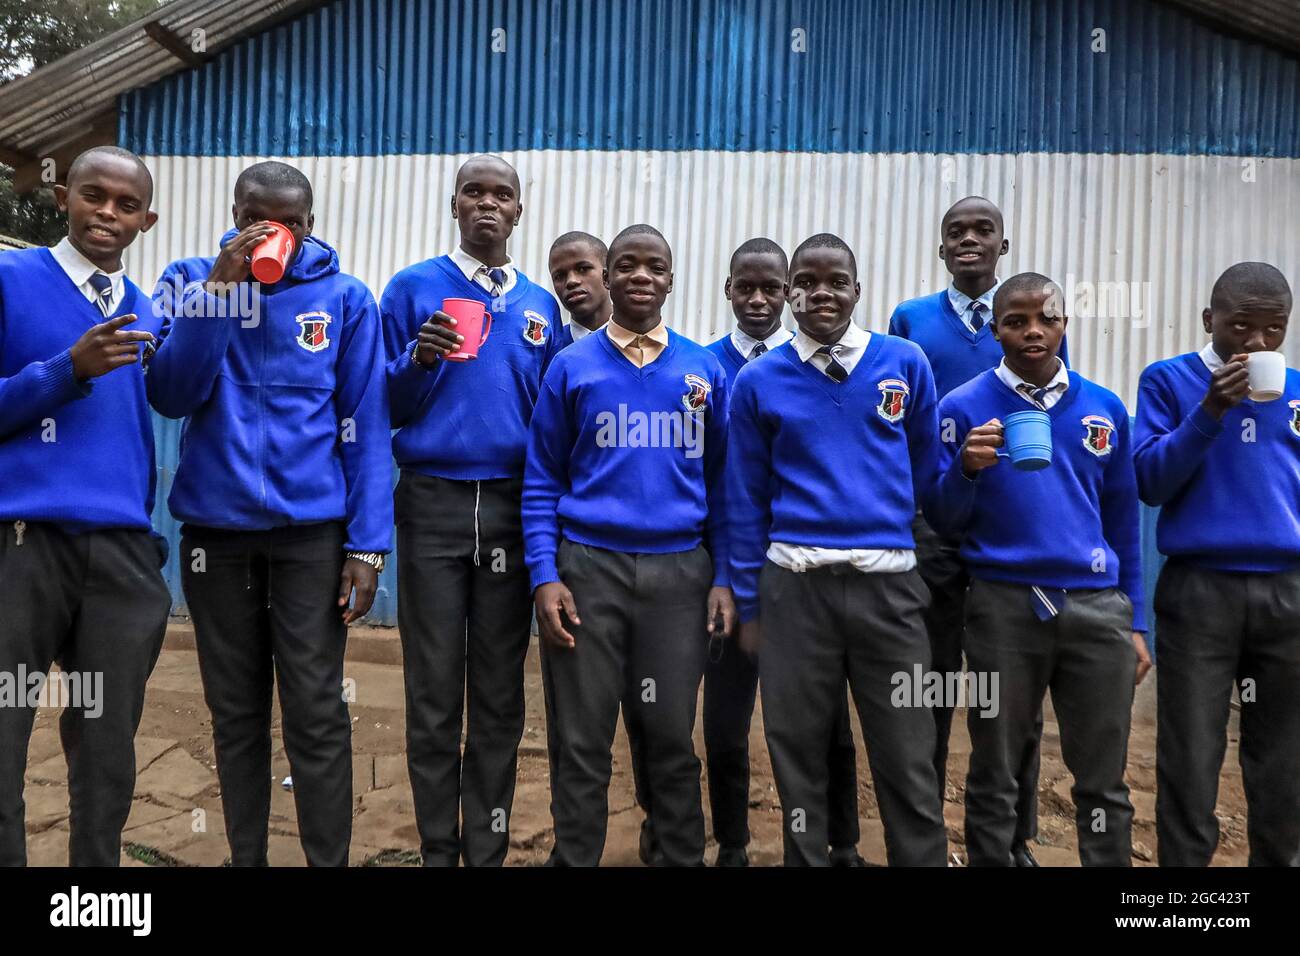 The 18-year-old Saviour Omondi, a local artist (C) takes a photo with his school mates outside his school compound in Raila Educational Centre in Nairobi.An 18-year-old artist born and raised in Kibera, from a family of five, he began his love for art back in 2009 by copying and learning most skills from his dad who was doing art but not to a professional level. Omondi's main focus was to portray his home through his artwork and dreamt of making the best out of his art in the future after his studies. (Photo by Donwilson Odhiamb/SOPA Images/Sipa USA) Stock Photo